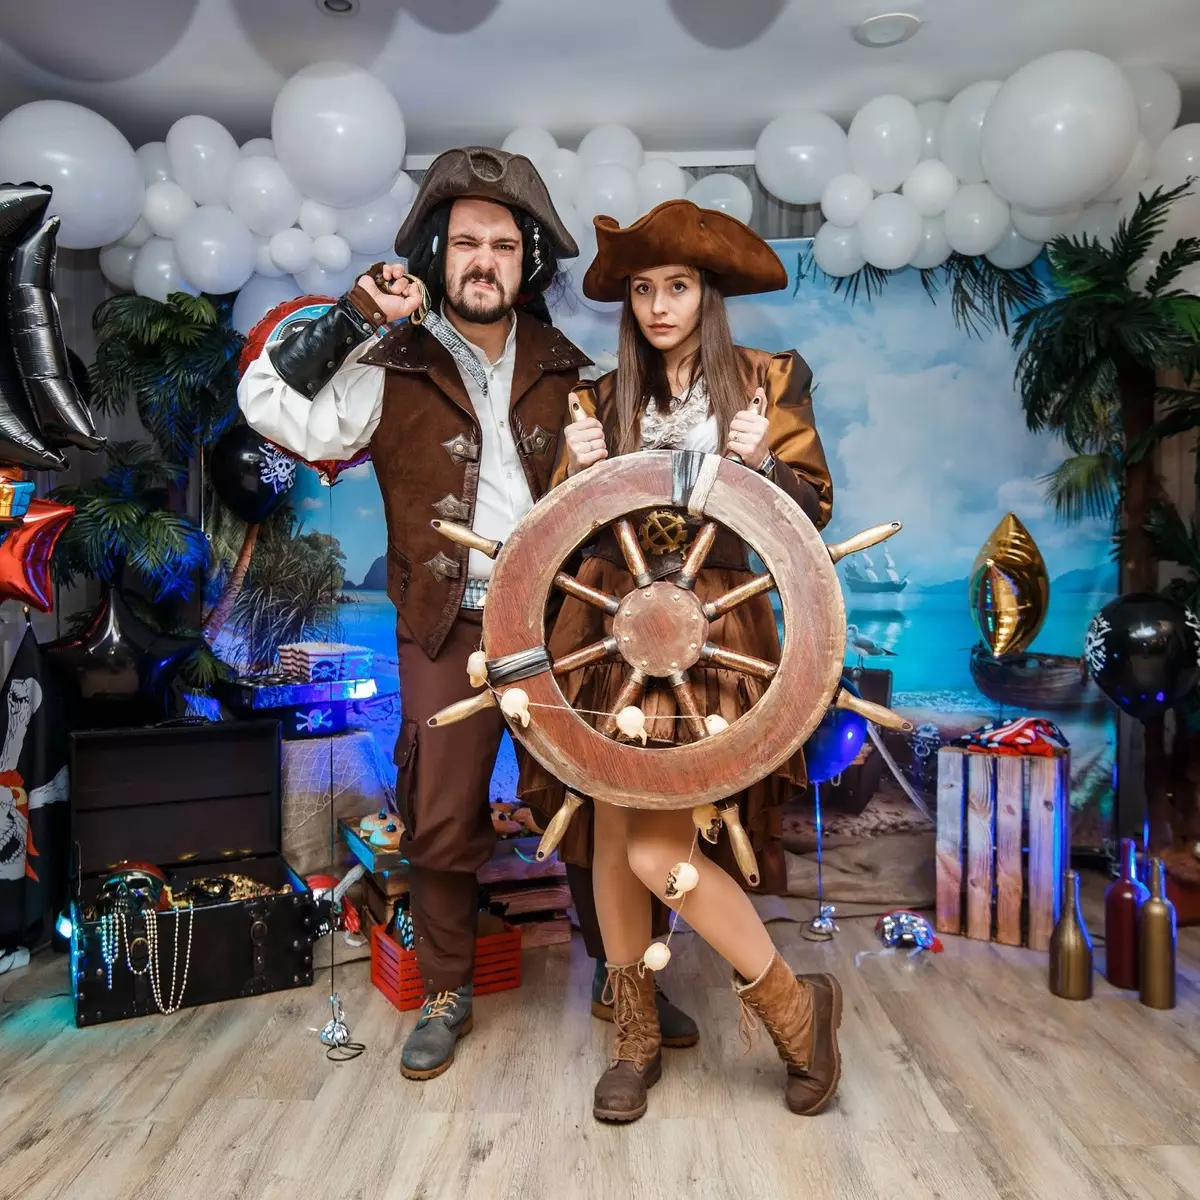 Pirate Party (52 photos): Scenario for children and adults, Birthday decoration, Competitions for a fun company 18152_9